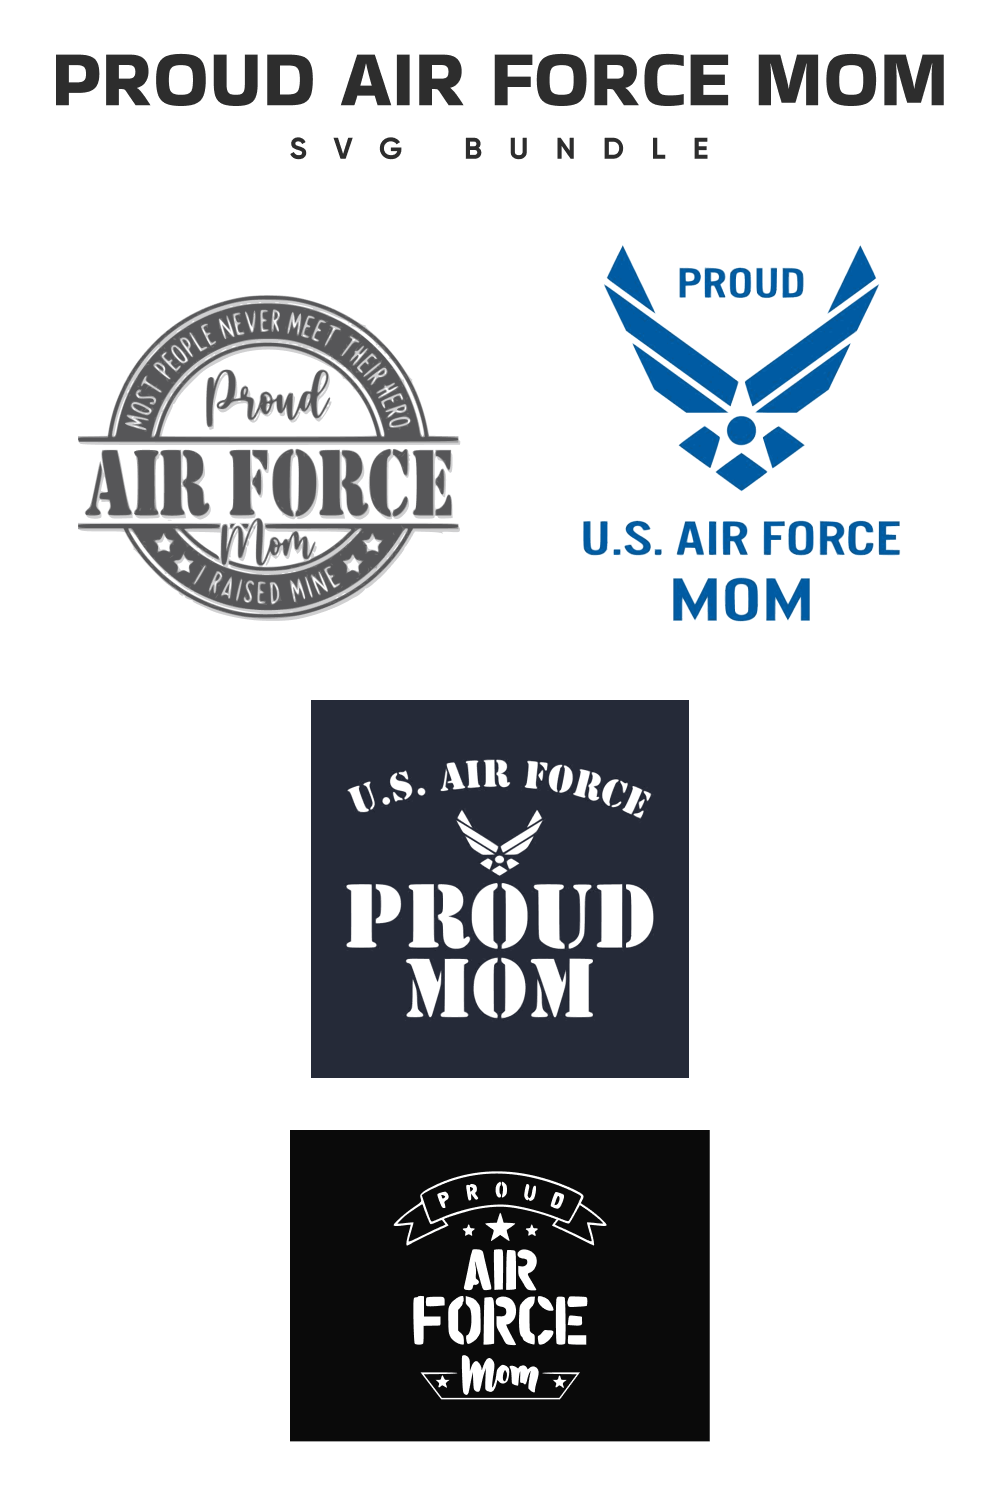 Logos of various shapes with inscriptions about the Air Force and mom's pride.